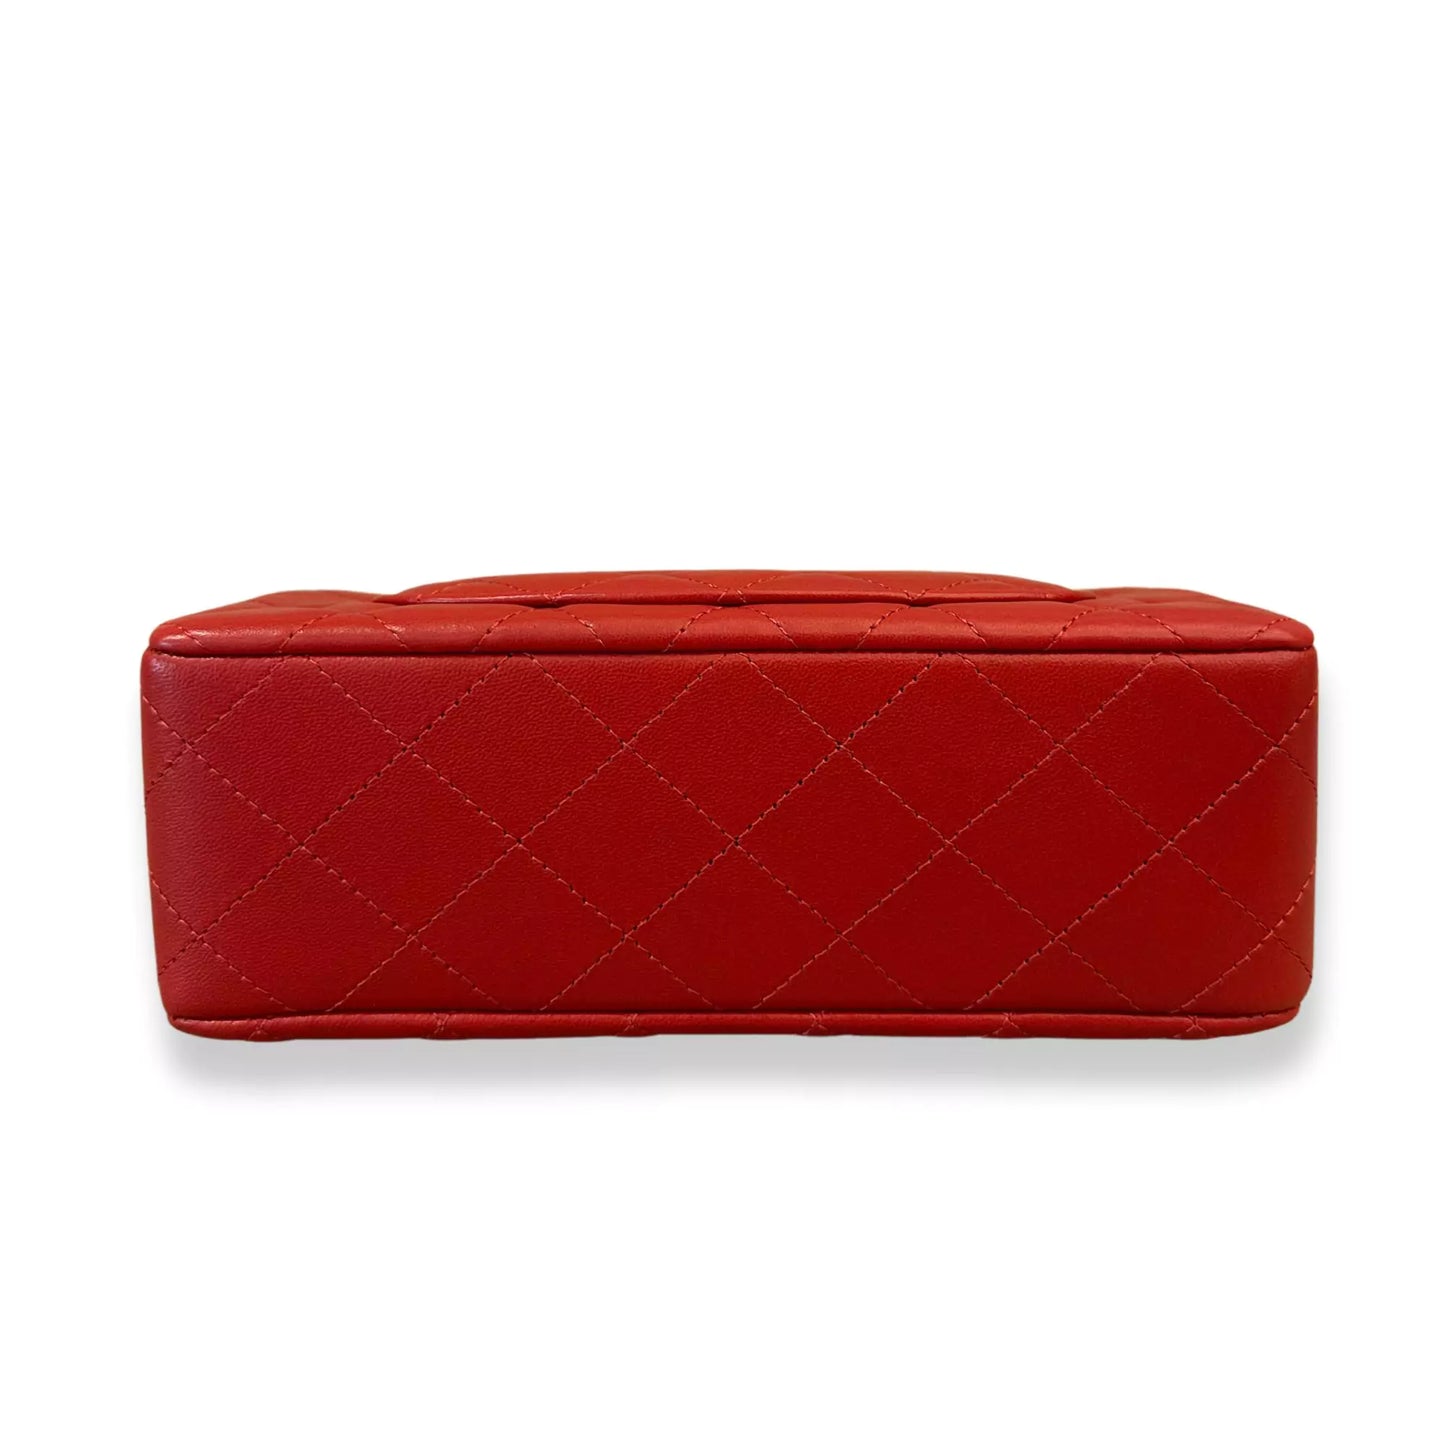 CHANEL RED SMALL CLASSIC FLAP BAG